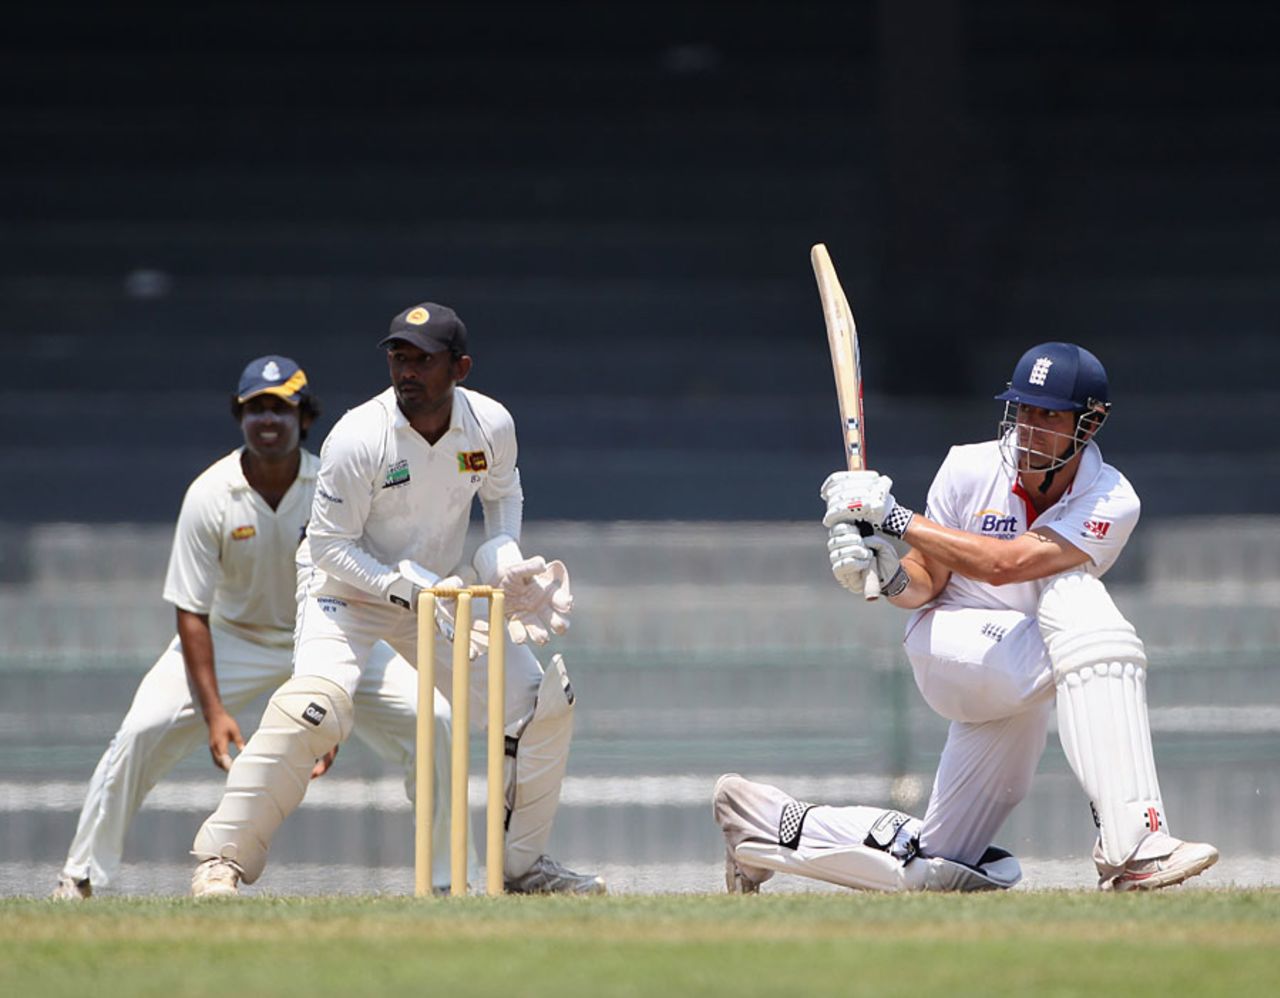 Alastair Cook sweeps during his hundred, Sri Lanka Board XI v England XI, Colombo, March 16, 2012